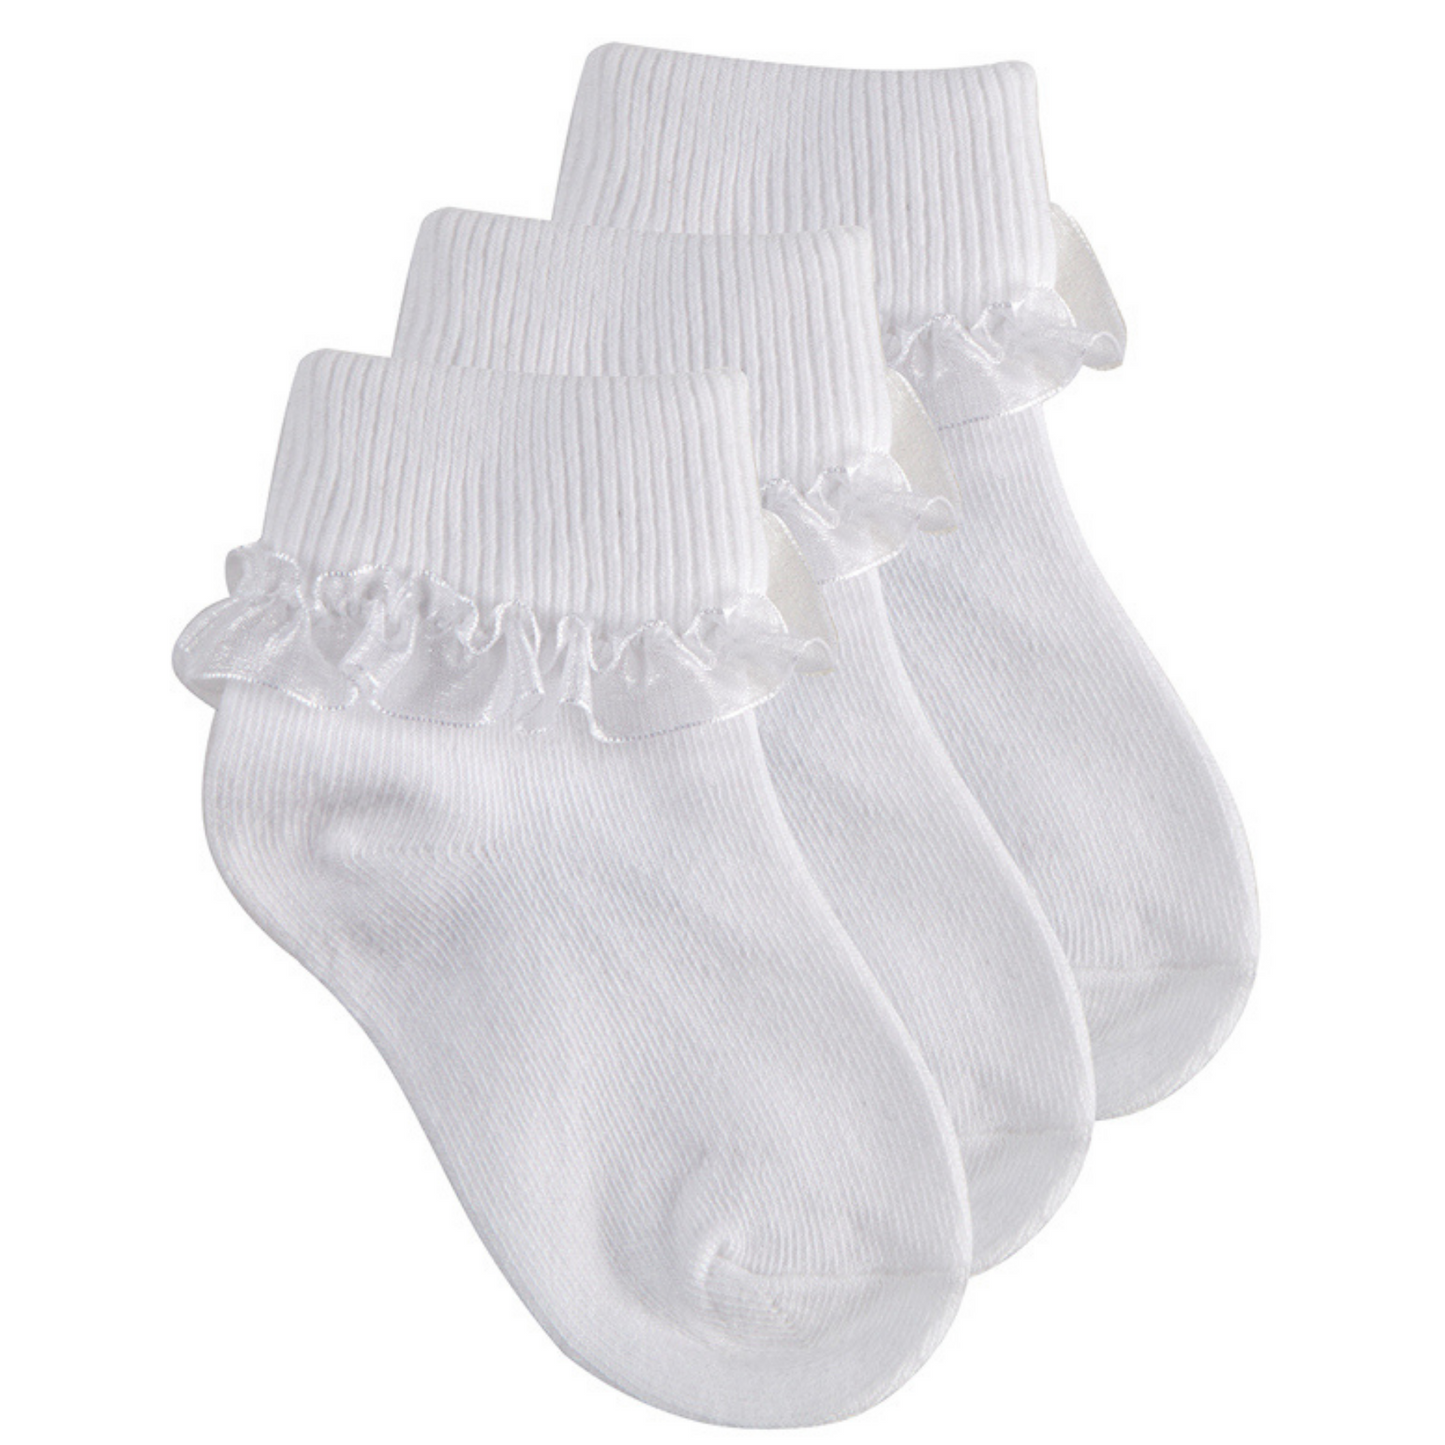 White Frilly Ankle Sock - 3 Pack